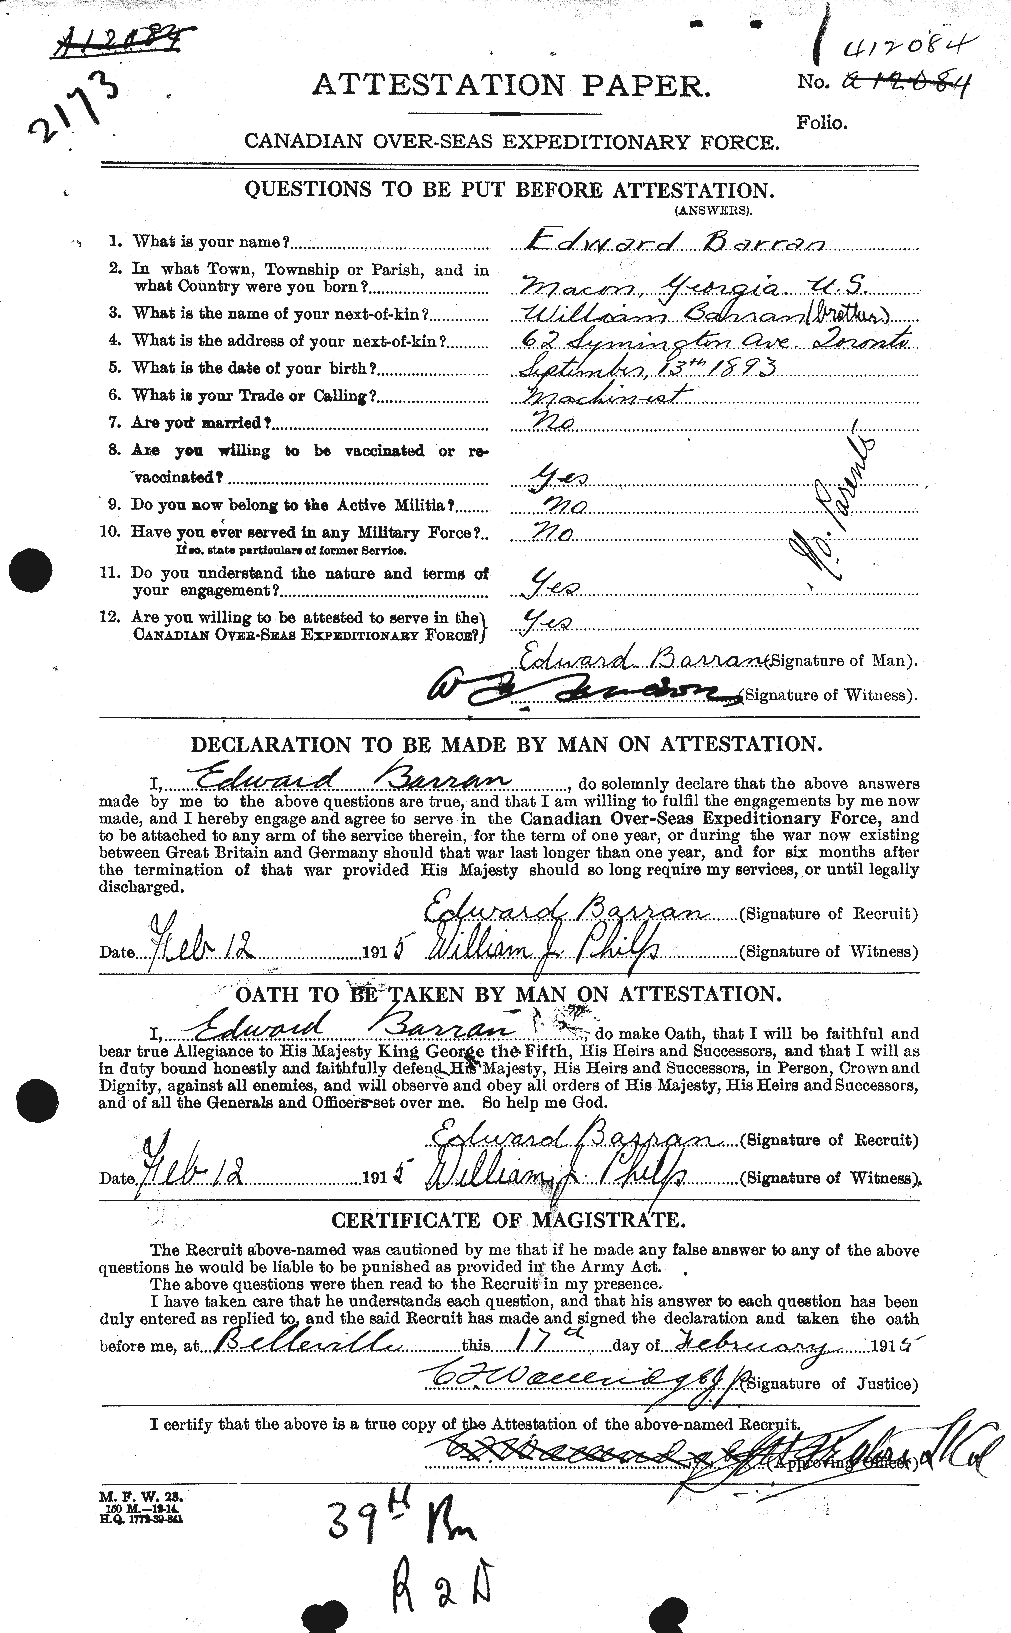 Personnel Records of the First World War - CEF 221587a